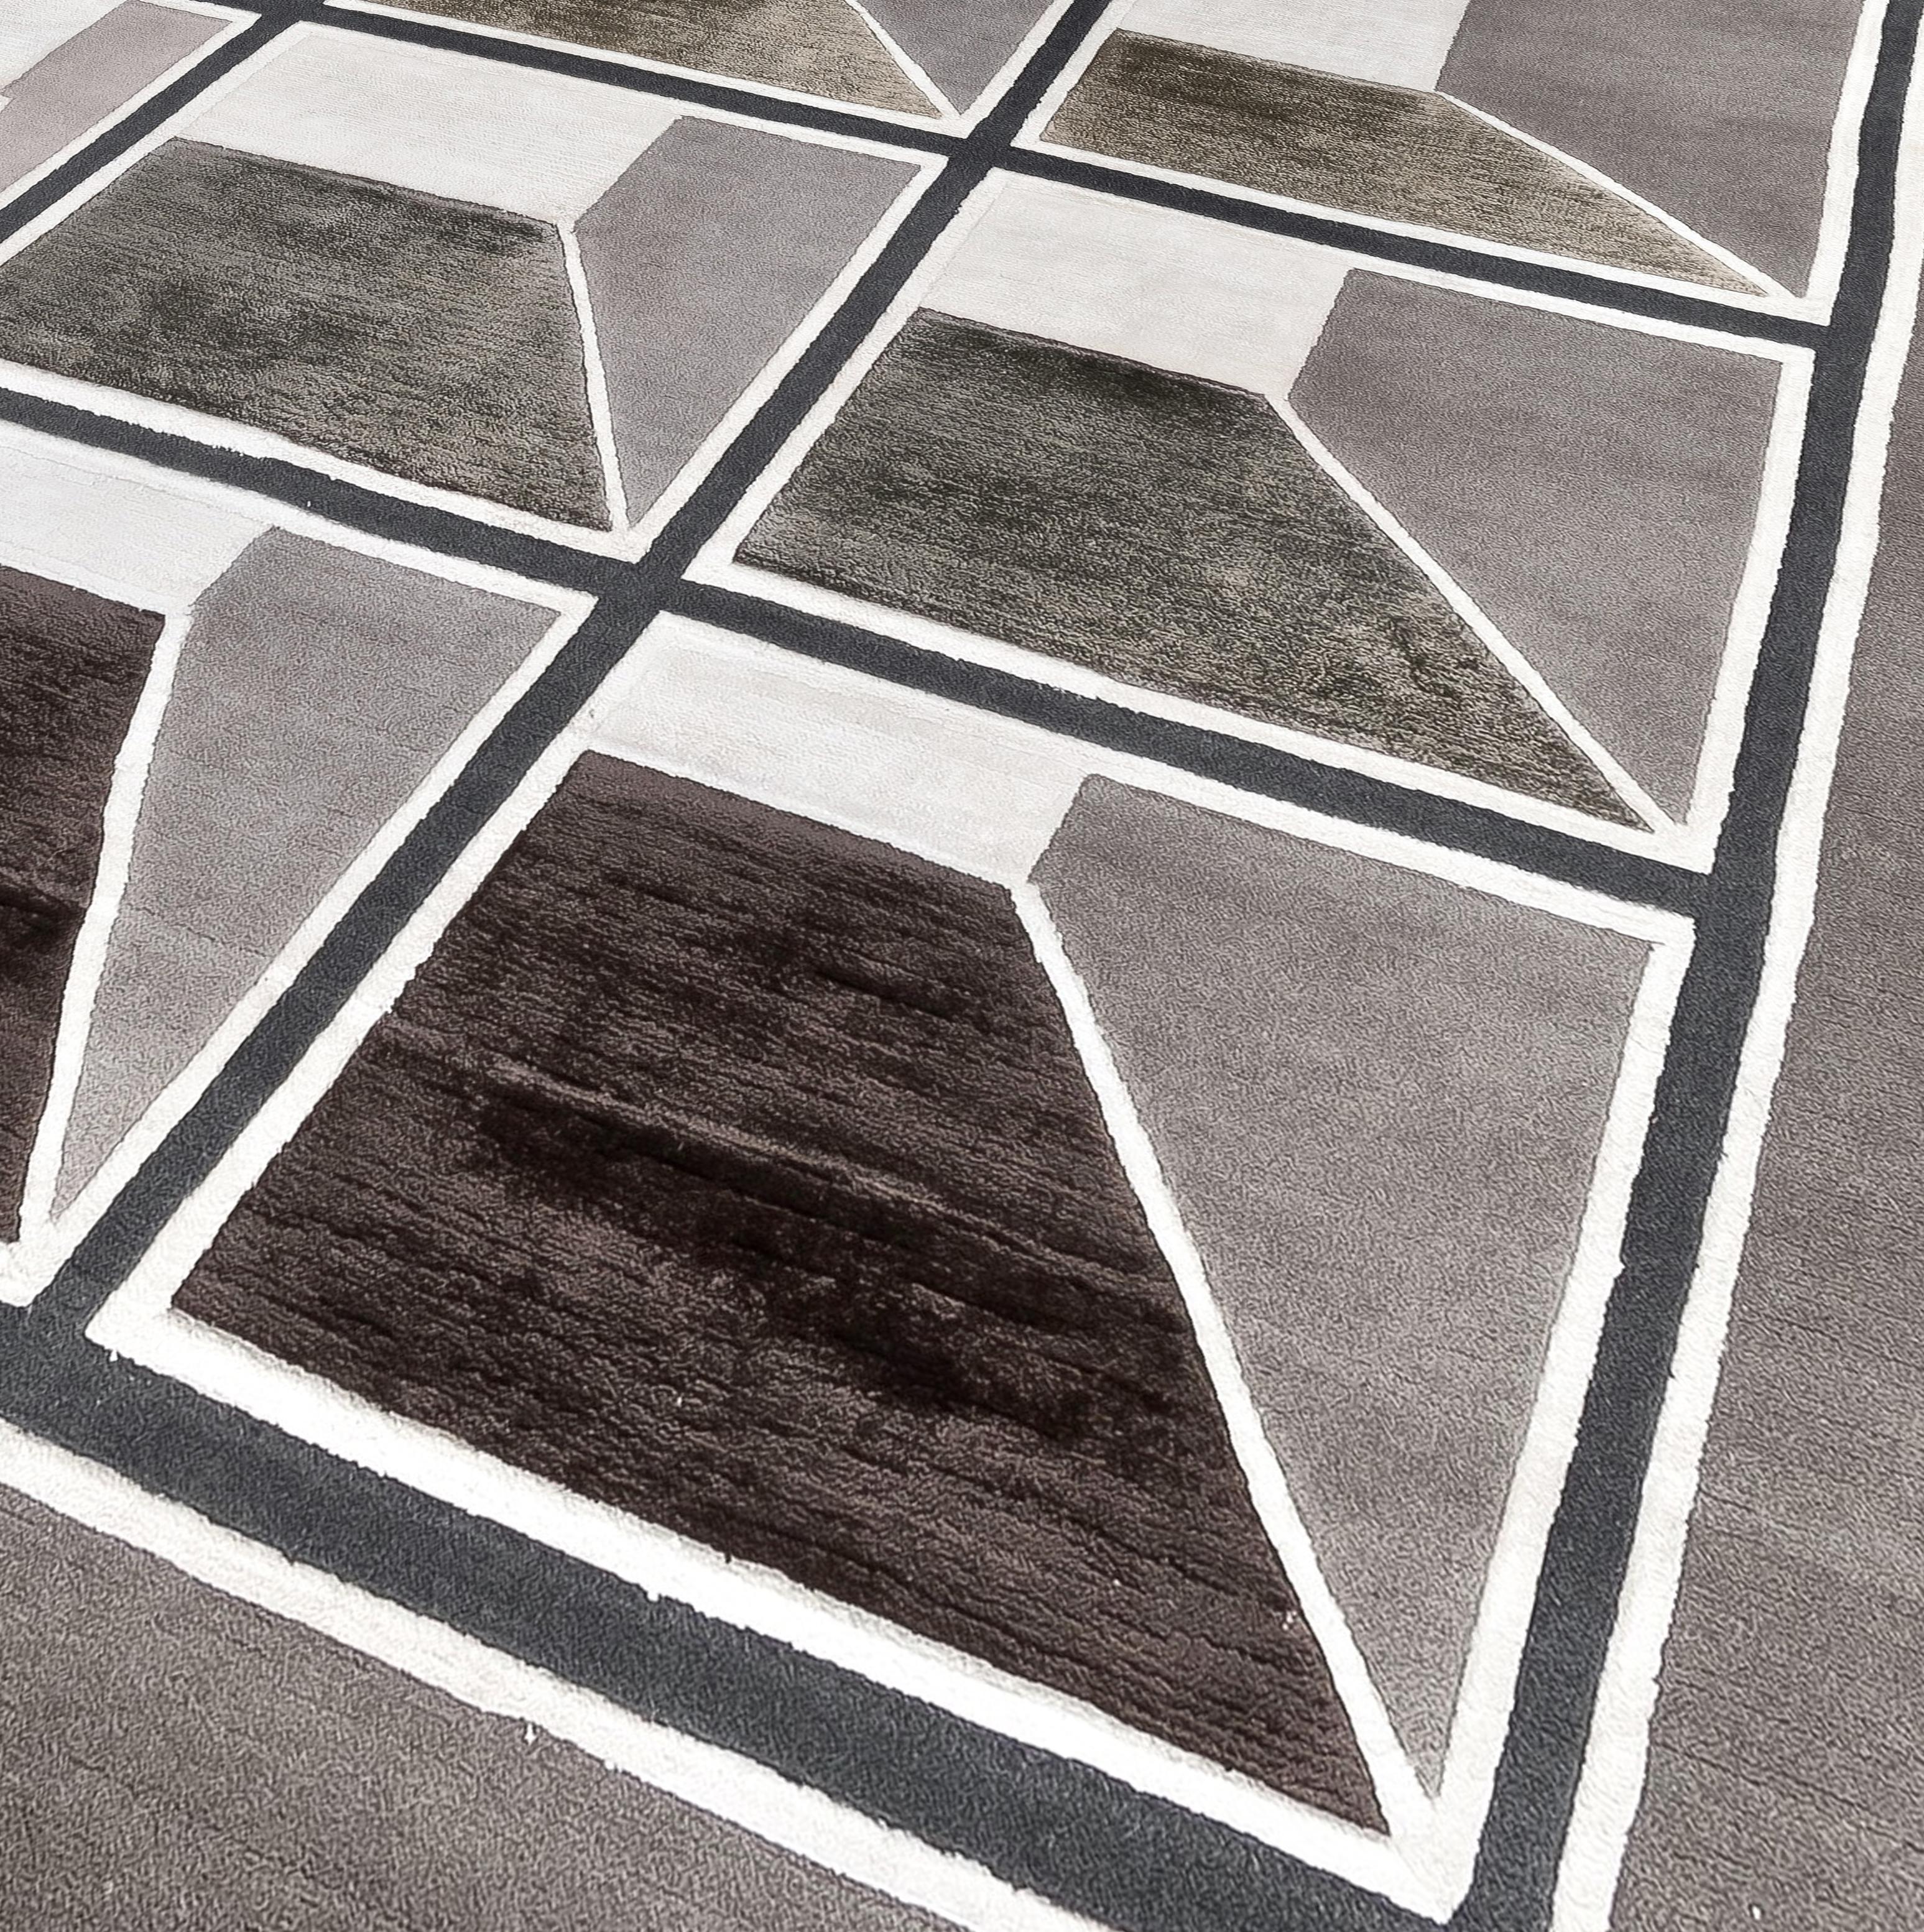 A geometric and concentric structure where it's not clear whether the point of view is from up to down or vice versa.
This rug is hand knotted in Nepal by our artisans by using 50% silk and 50% fine Himalayan wool dyed using vegetable and mineral